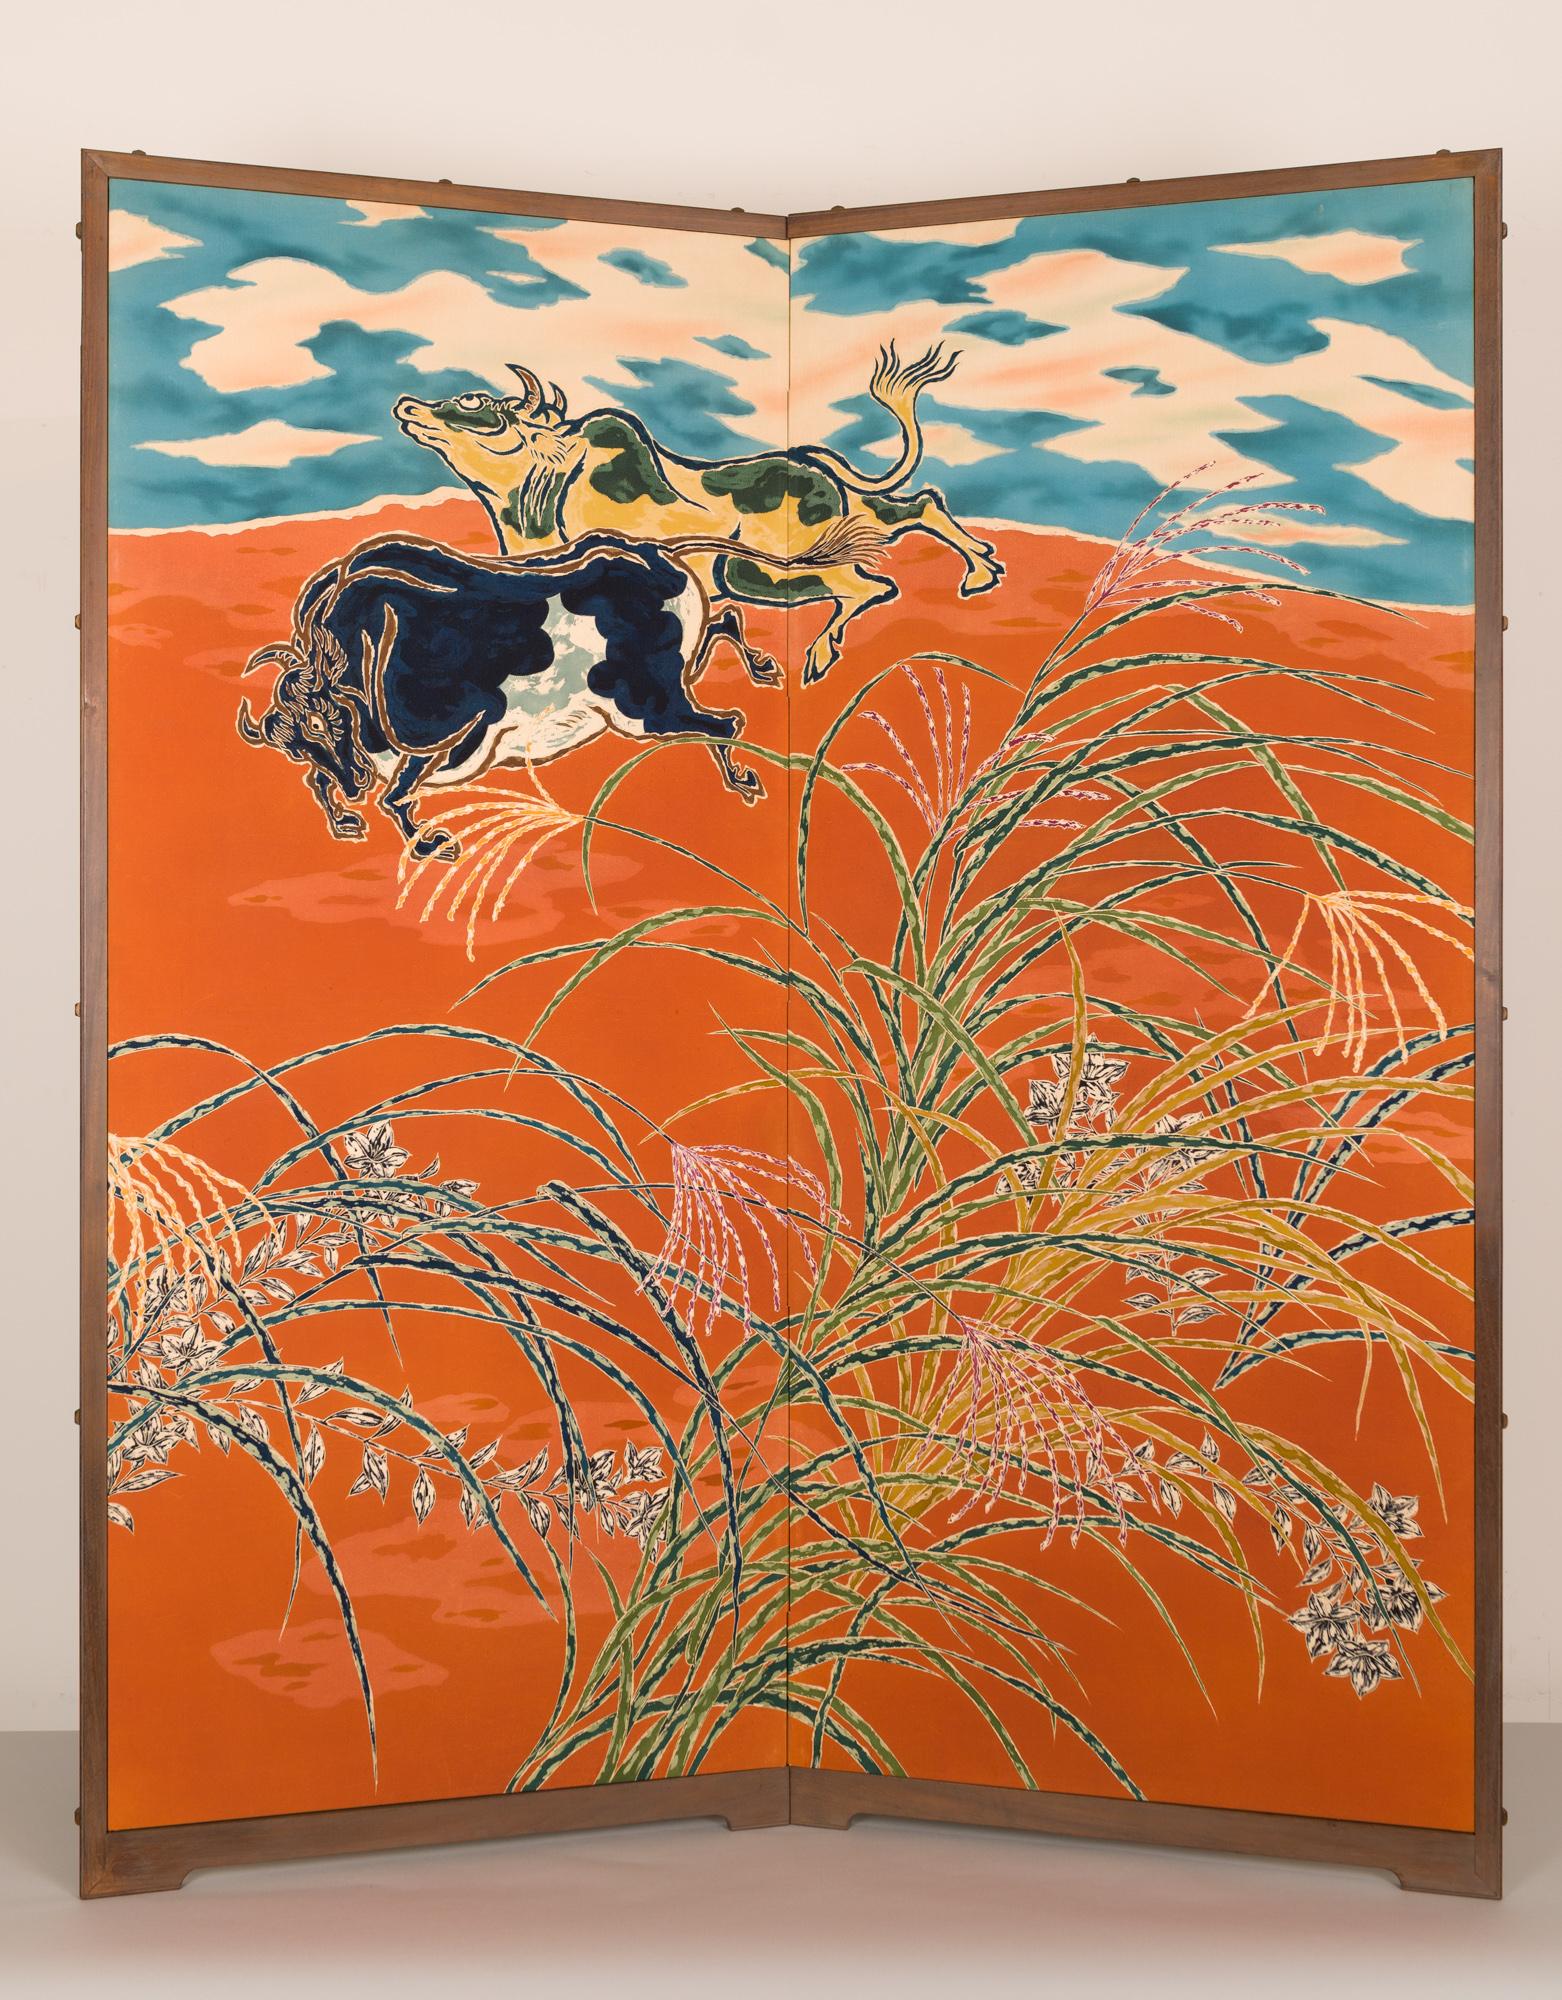 Showa period (1926 - 1989) vibrant painting on silk of playful steers under a cloudy sky amidst pasture grasses. The painting on this screen was made using a dying process called somemono, a traditional type of resist dying similar to batik. The